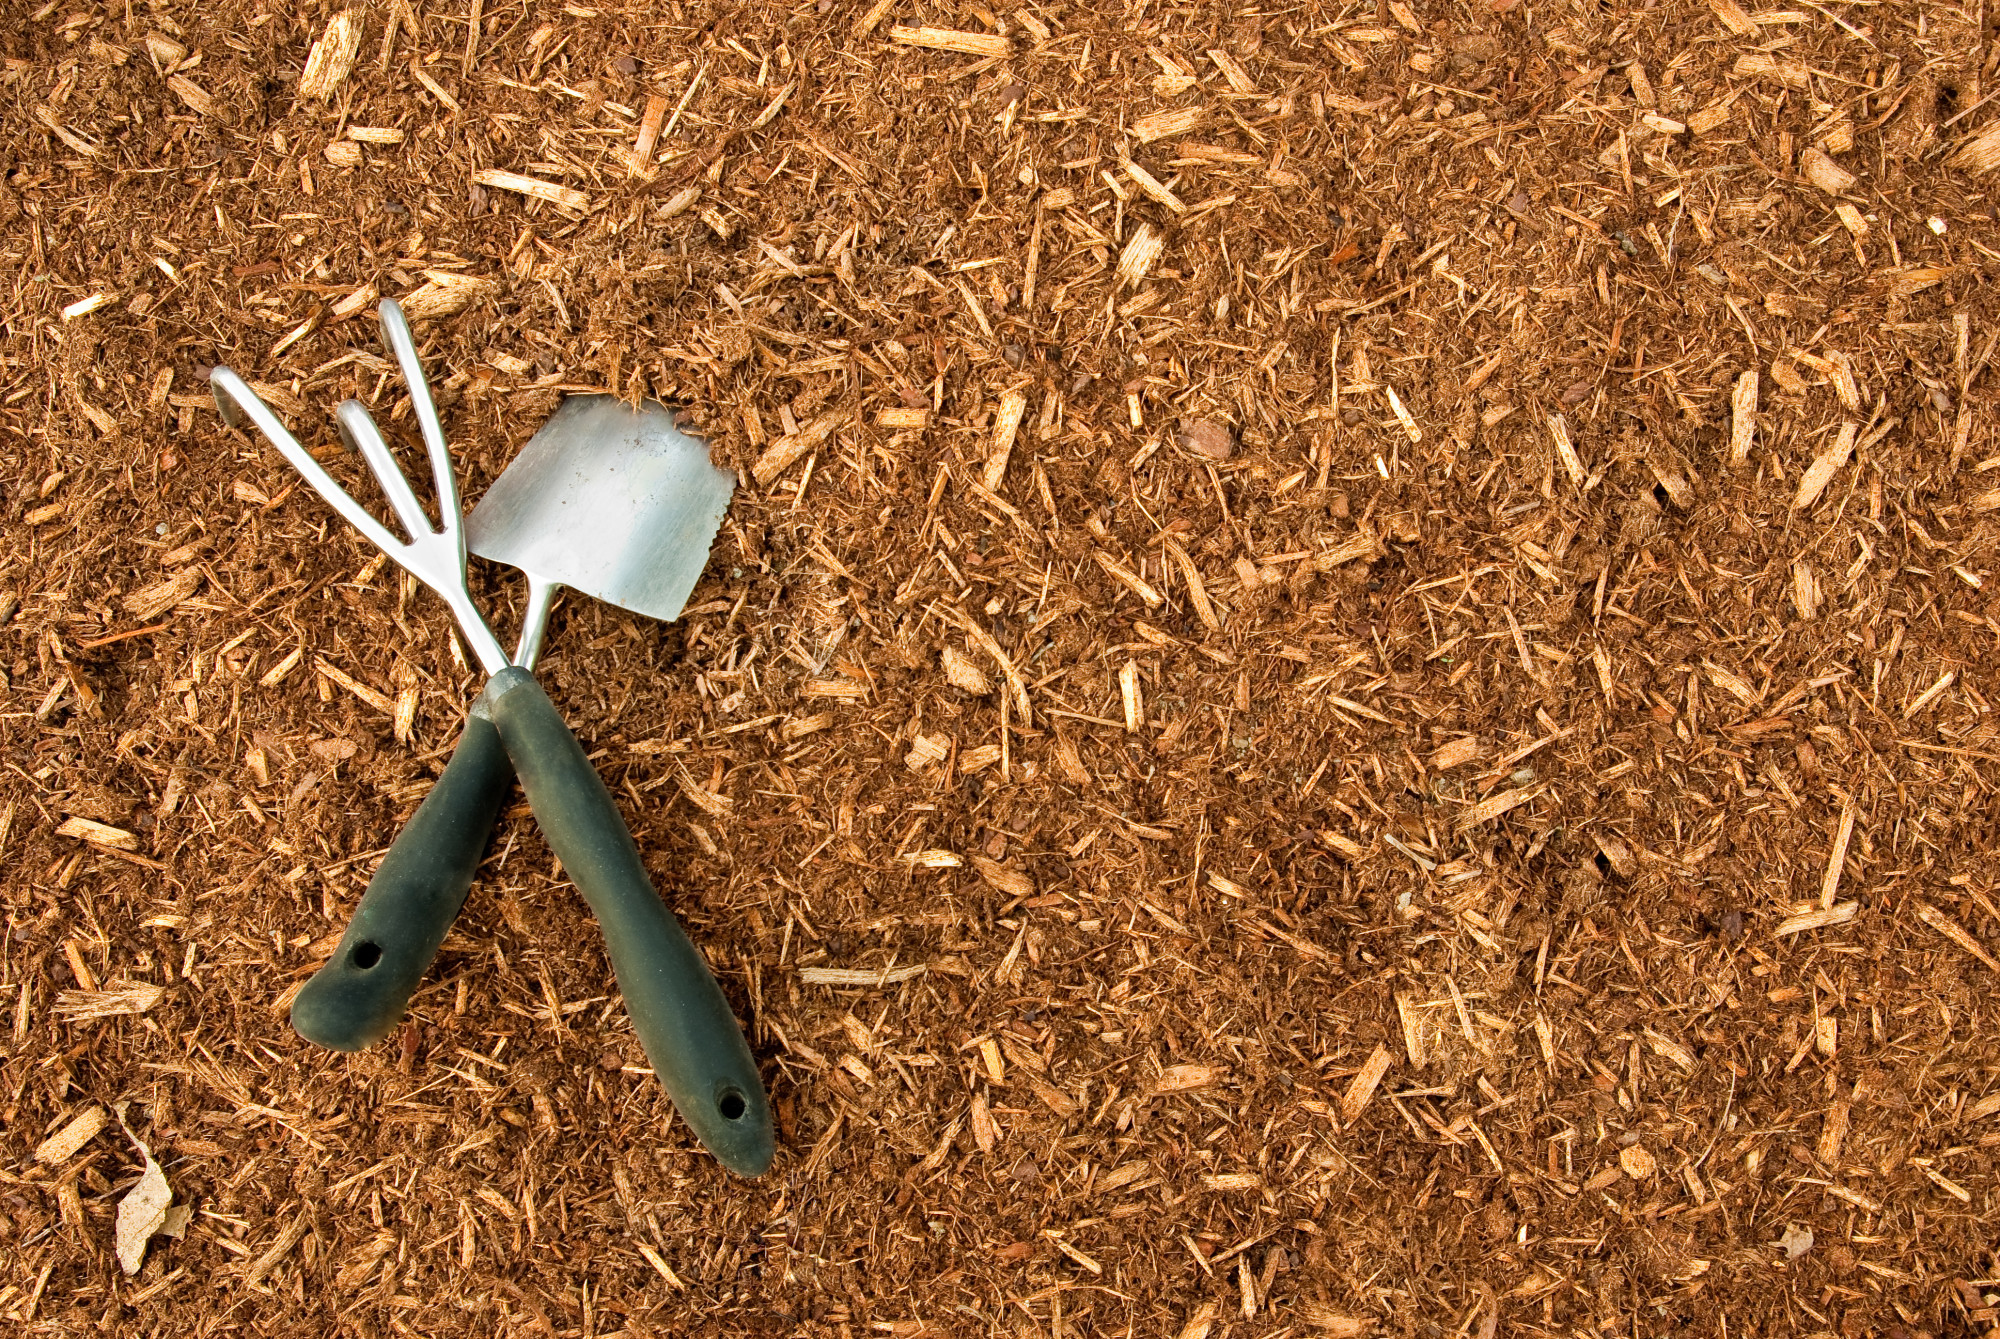 Mulching has plenty of benefits for your yard and plants. But replacing mulch will allow you to get the most benefit. Here's how often you should replace it.